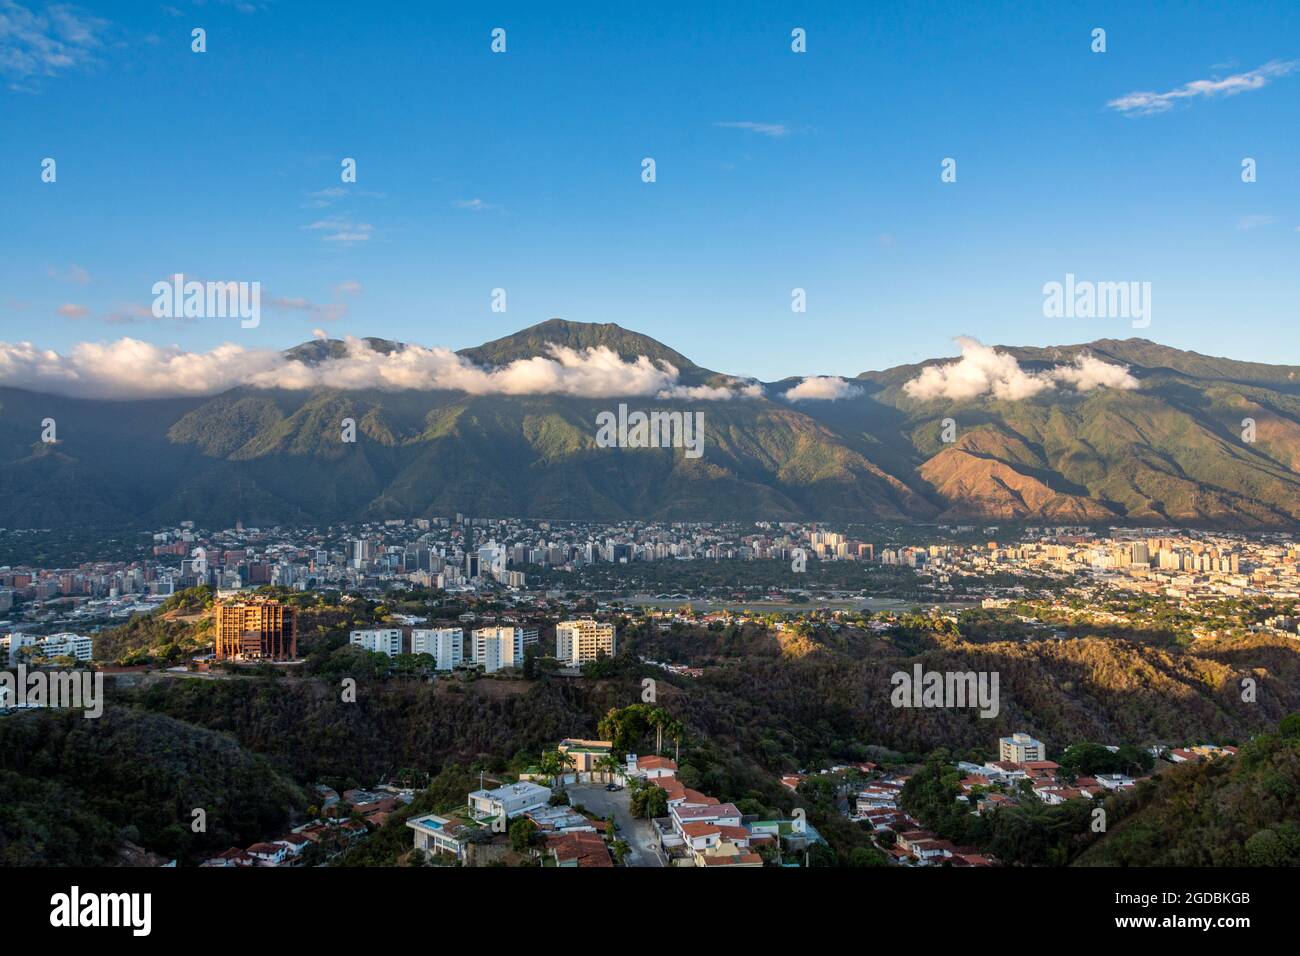 View of the city of Caracas, Venezuela and the mountain of El Avila national park. Stock Photo